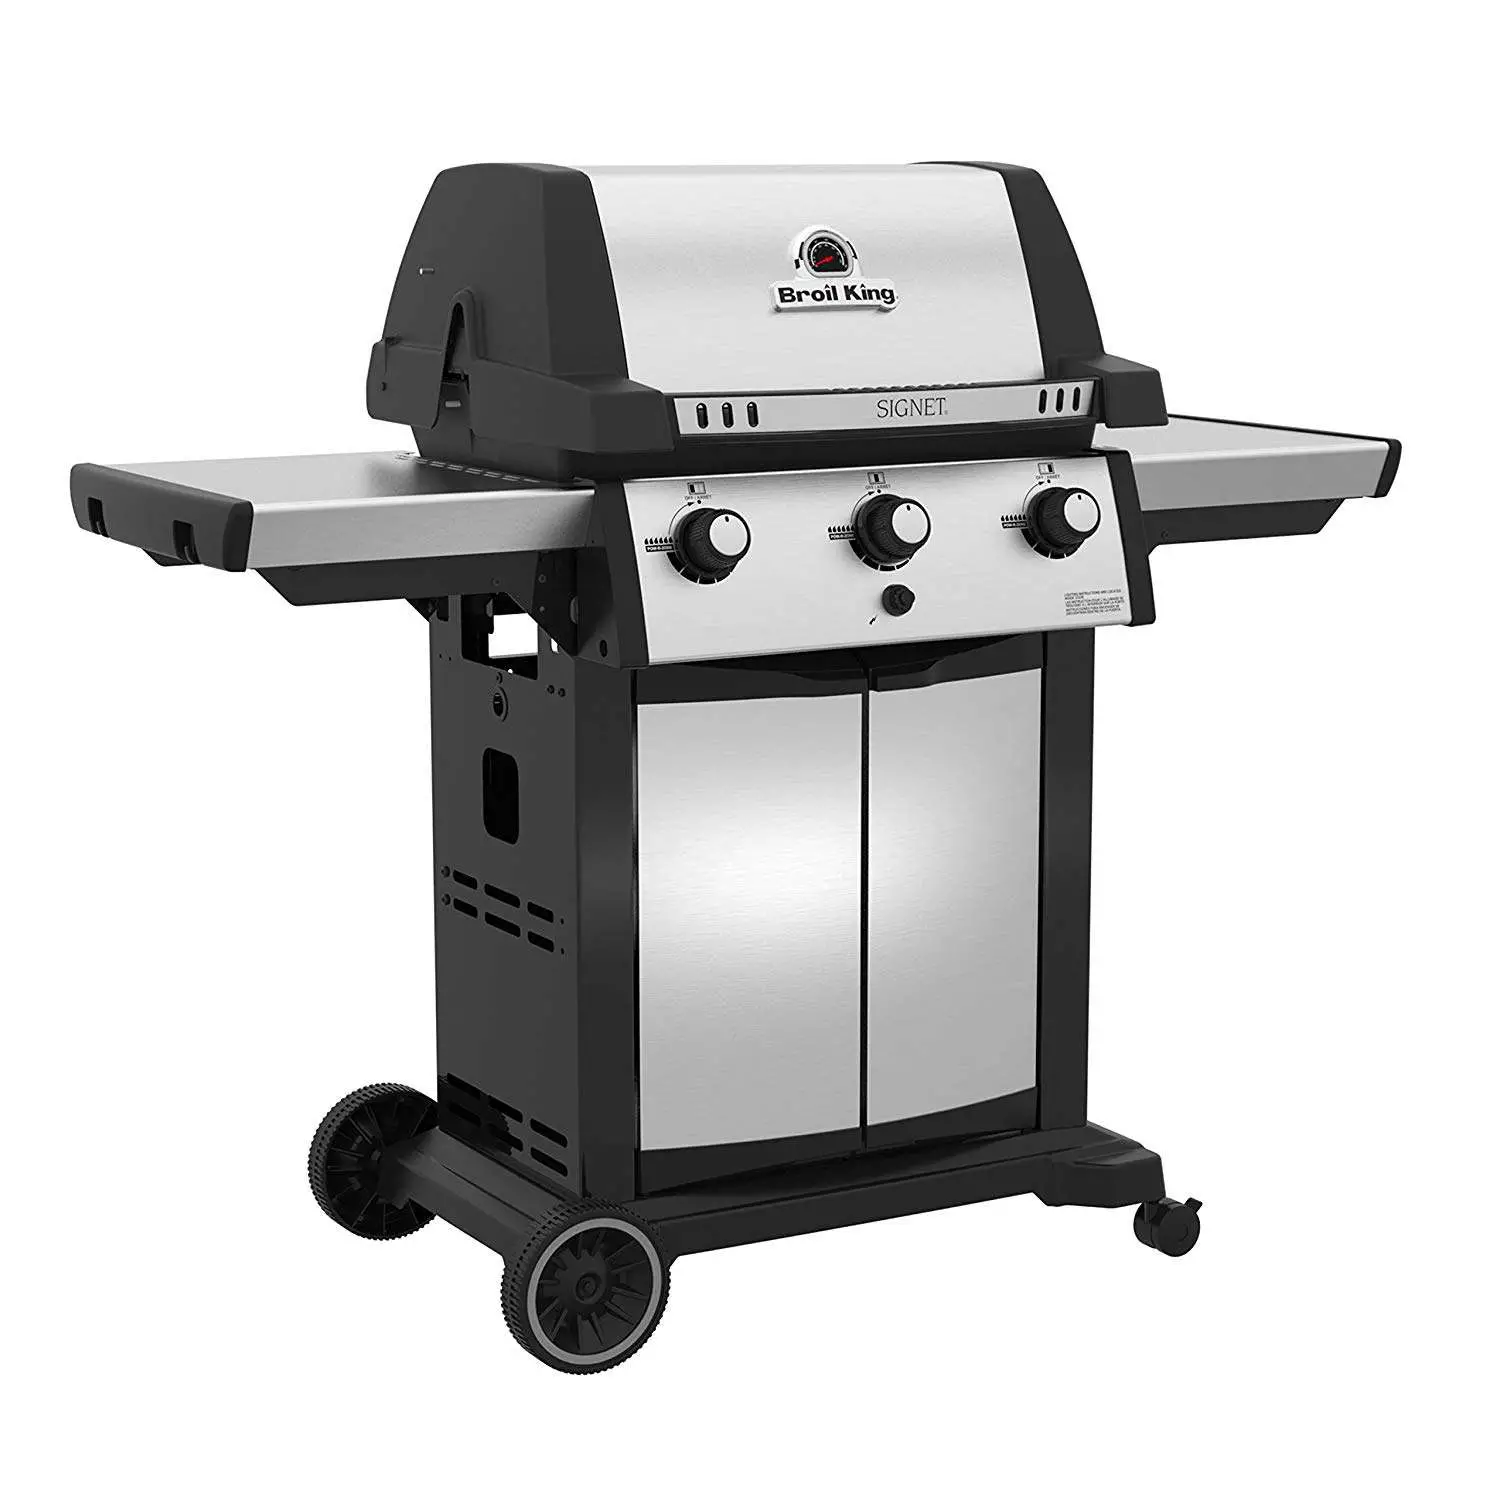 Broil King Signet 320 Review